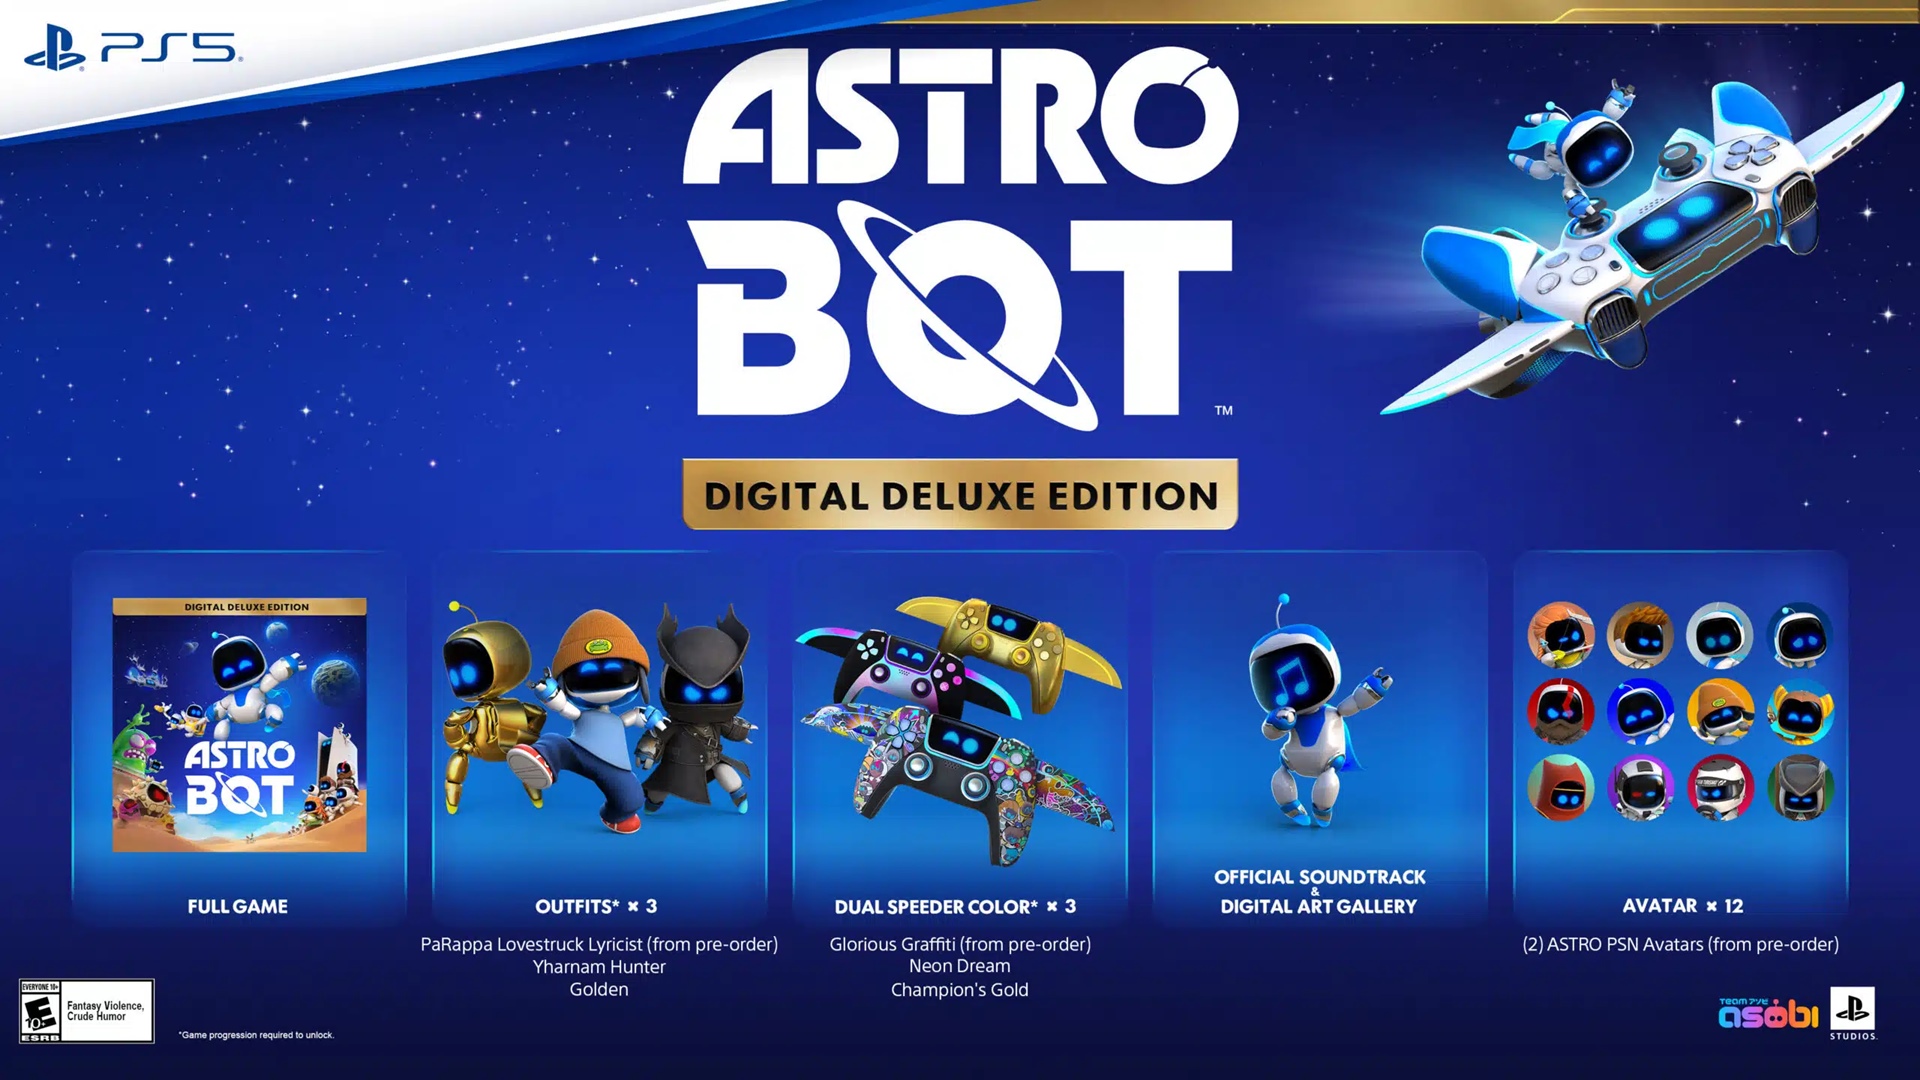 Bonus for the Digital Deluxe Edition version of the new Astro Bot on PS5.